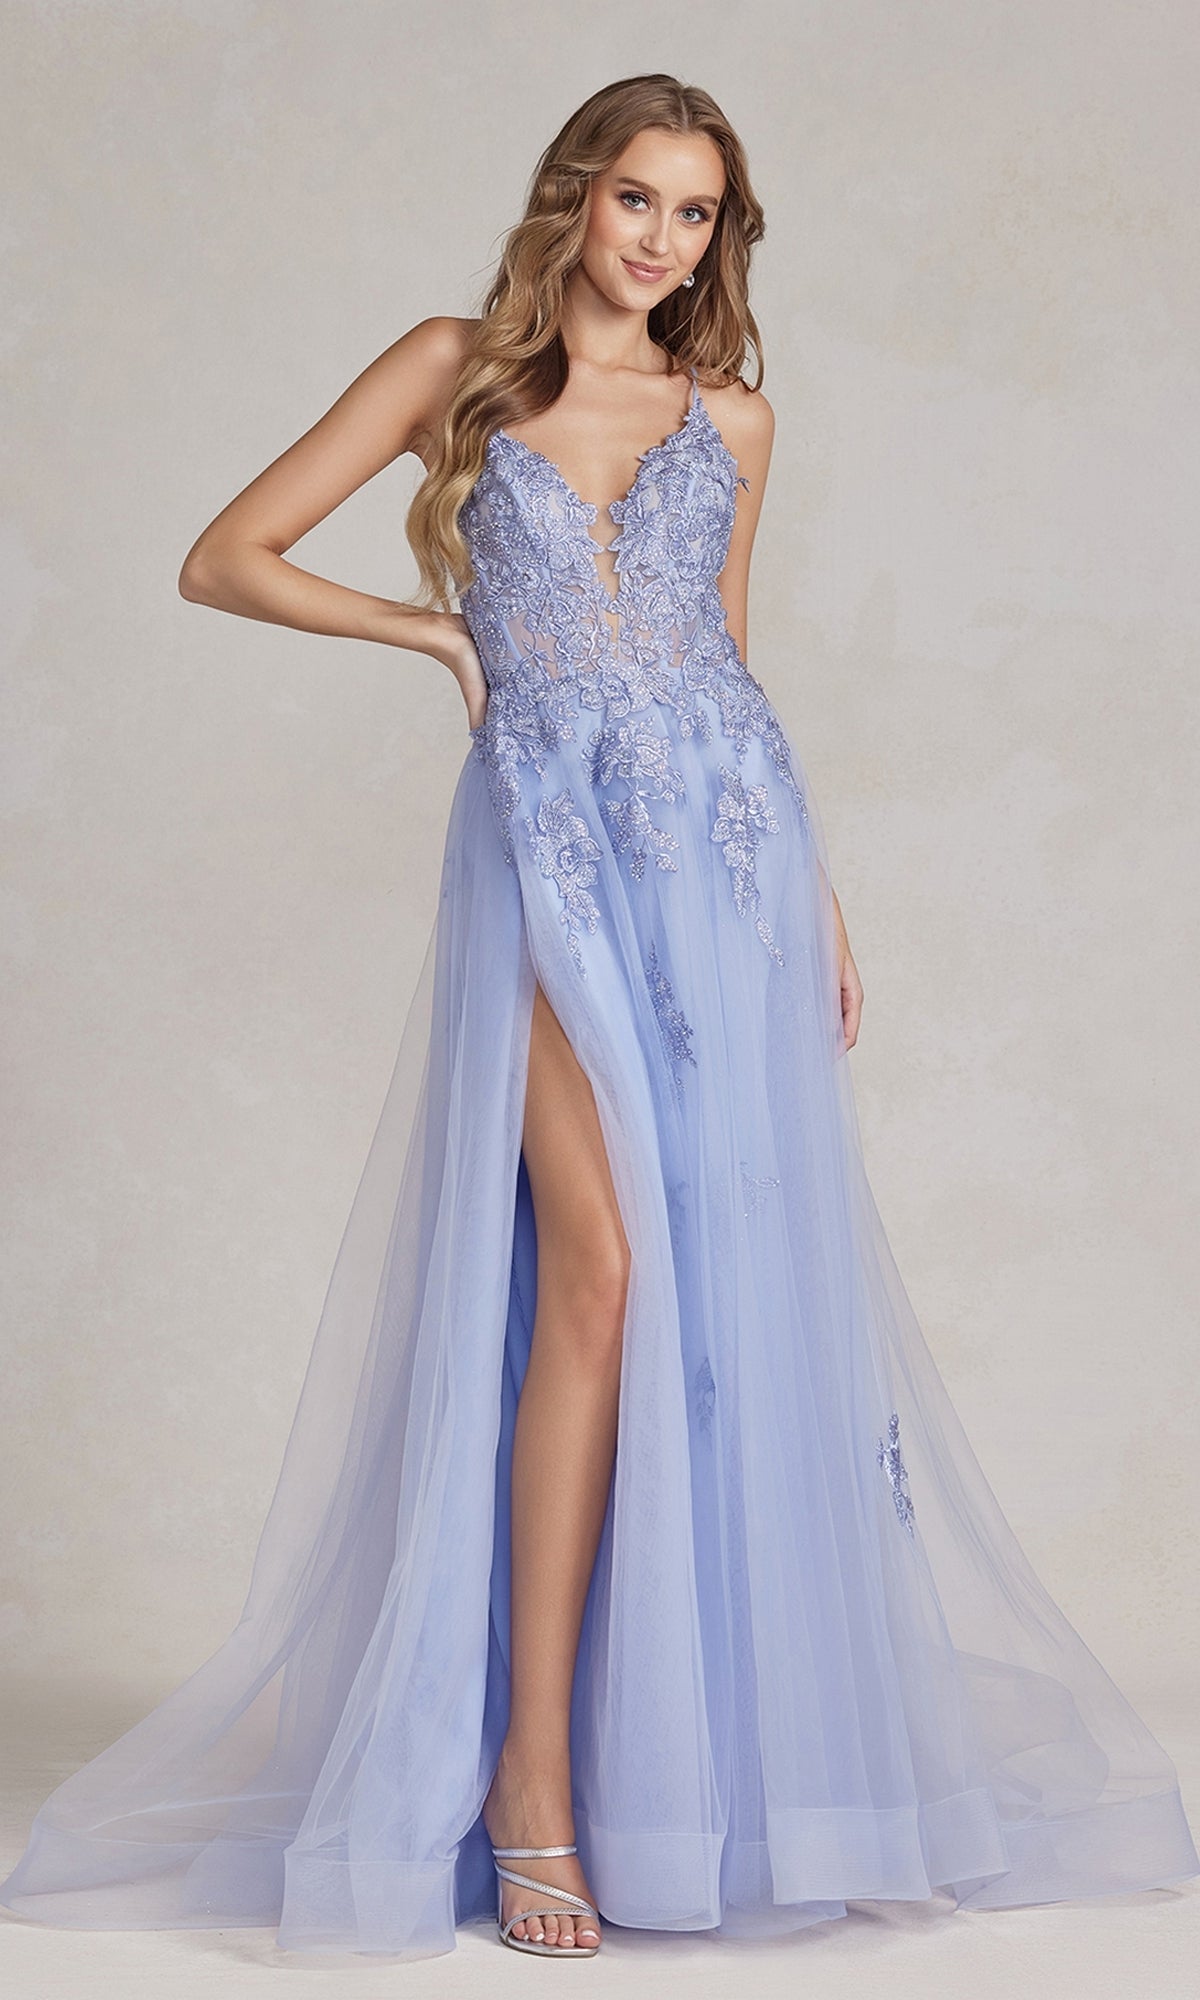 Periwinkle Long A-Line Lace Prom Dress with Wrap-Style Skirt